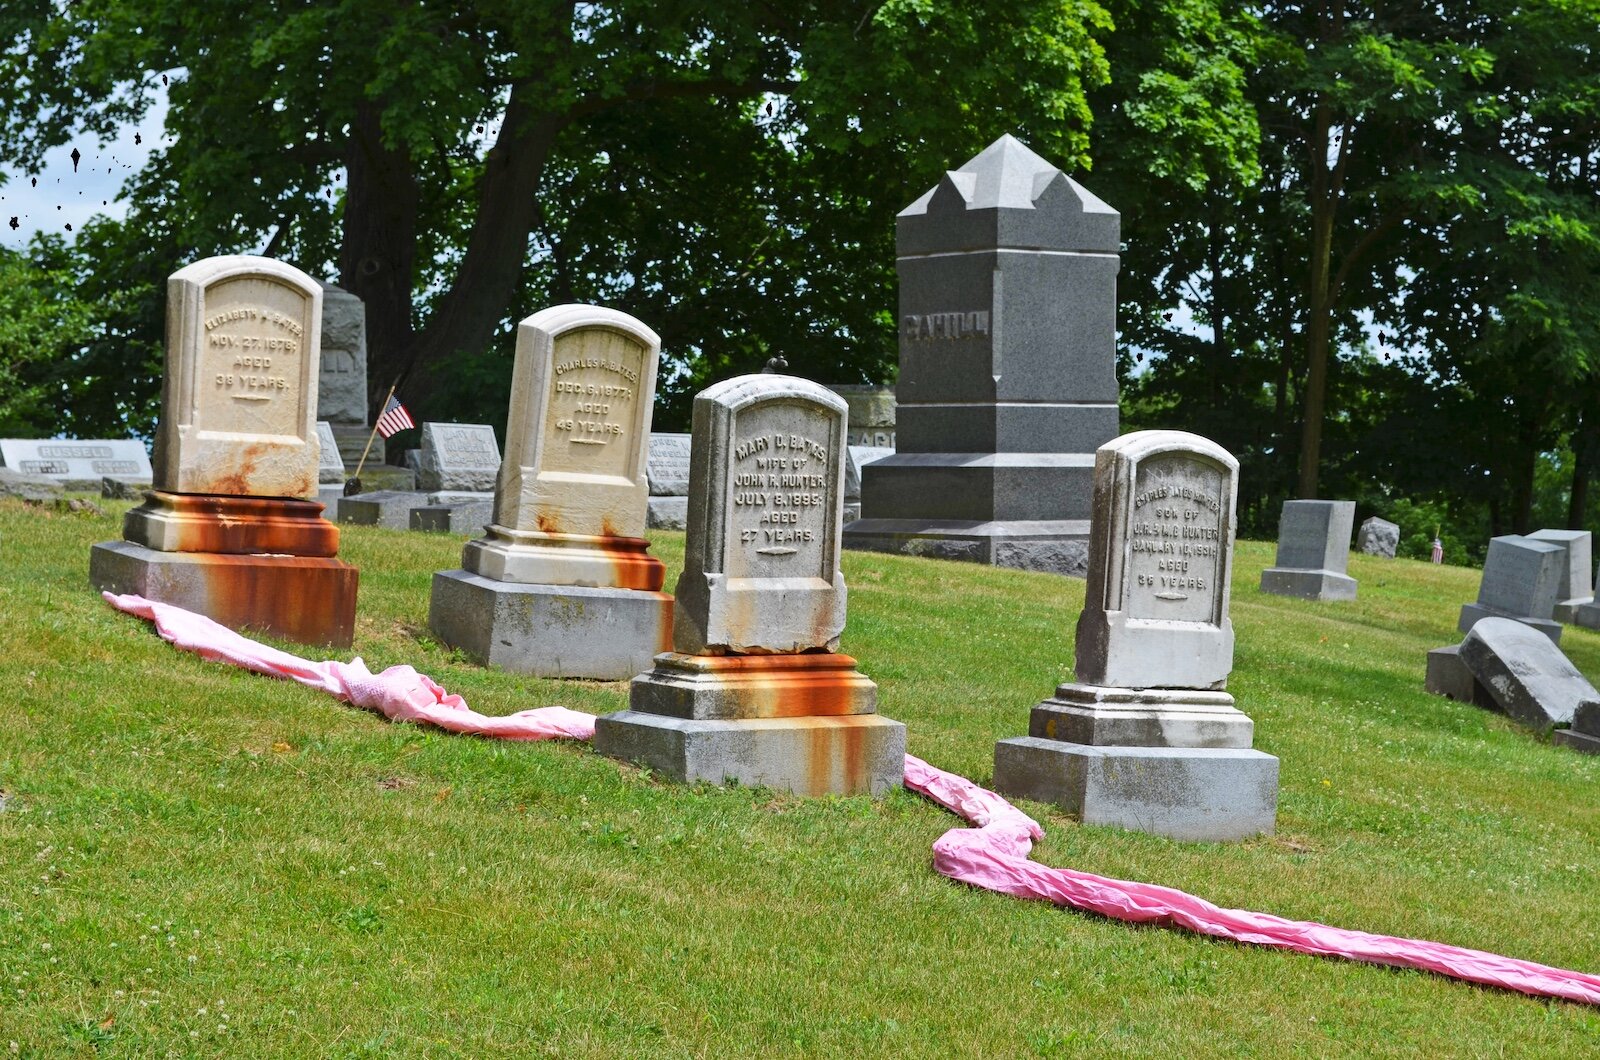 Photographs taken at Mountain Home Cemetery in Kalamazoo, using a long swath of donated white cloth dyed red and pink to connect the graves as a way of reflecting many faiths' belief that we are all truly interconnected and equal in death.